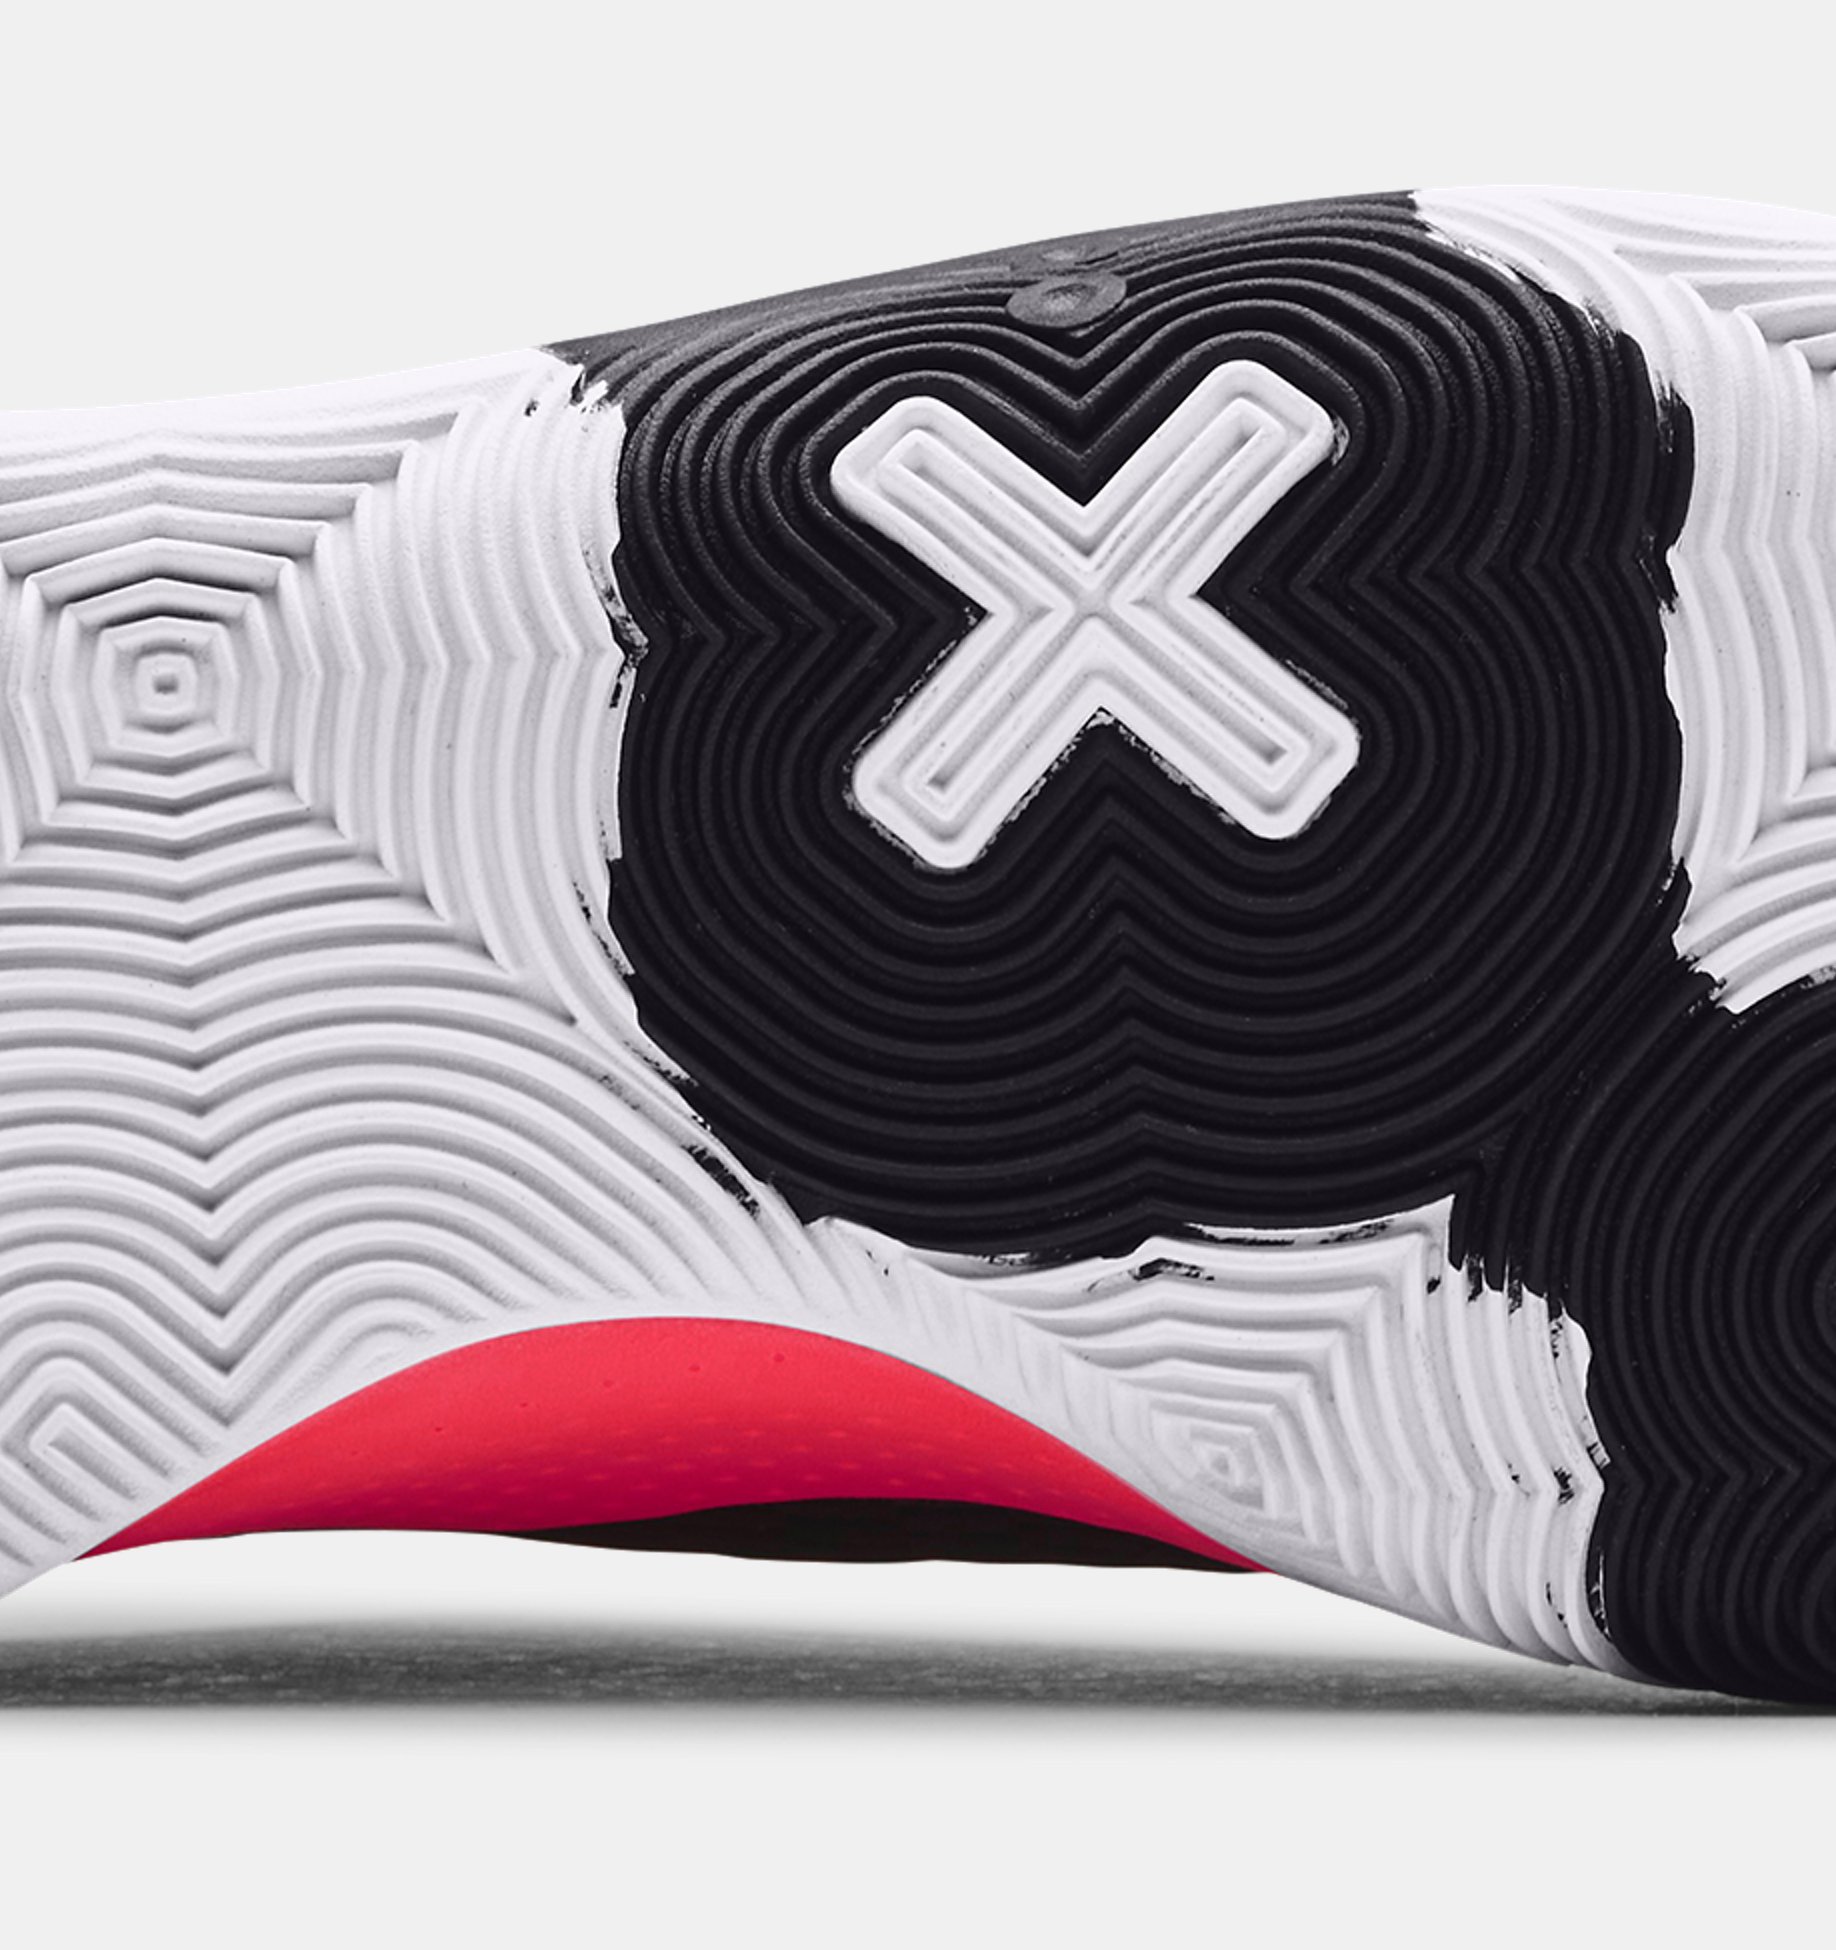 https://underarmour.scene7.com/is/image/Underarmour/3023738-002_SOLE?rp=standard-30pad|pdpZoomDesktop&scl=0.50&fmt=jpg&qlt=85&resMode=sharp2&cache=on,on&bgc=f0f0f0&wid=1836&hei=1950&size=850,850